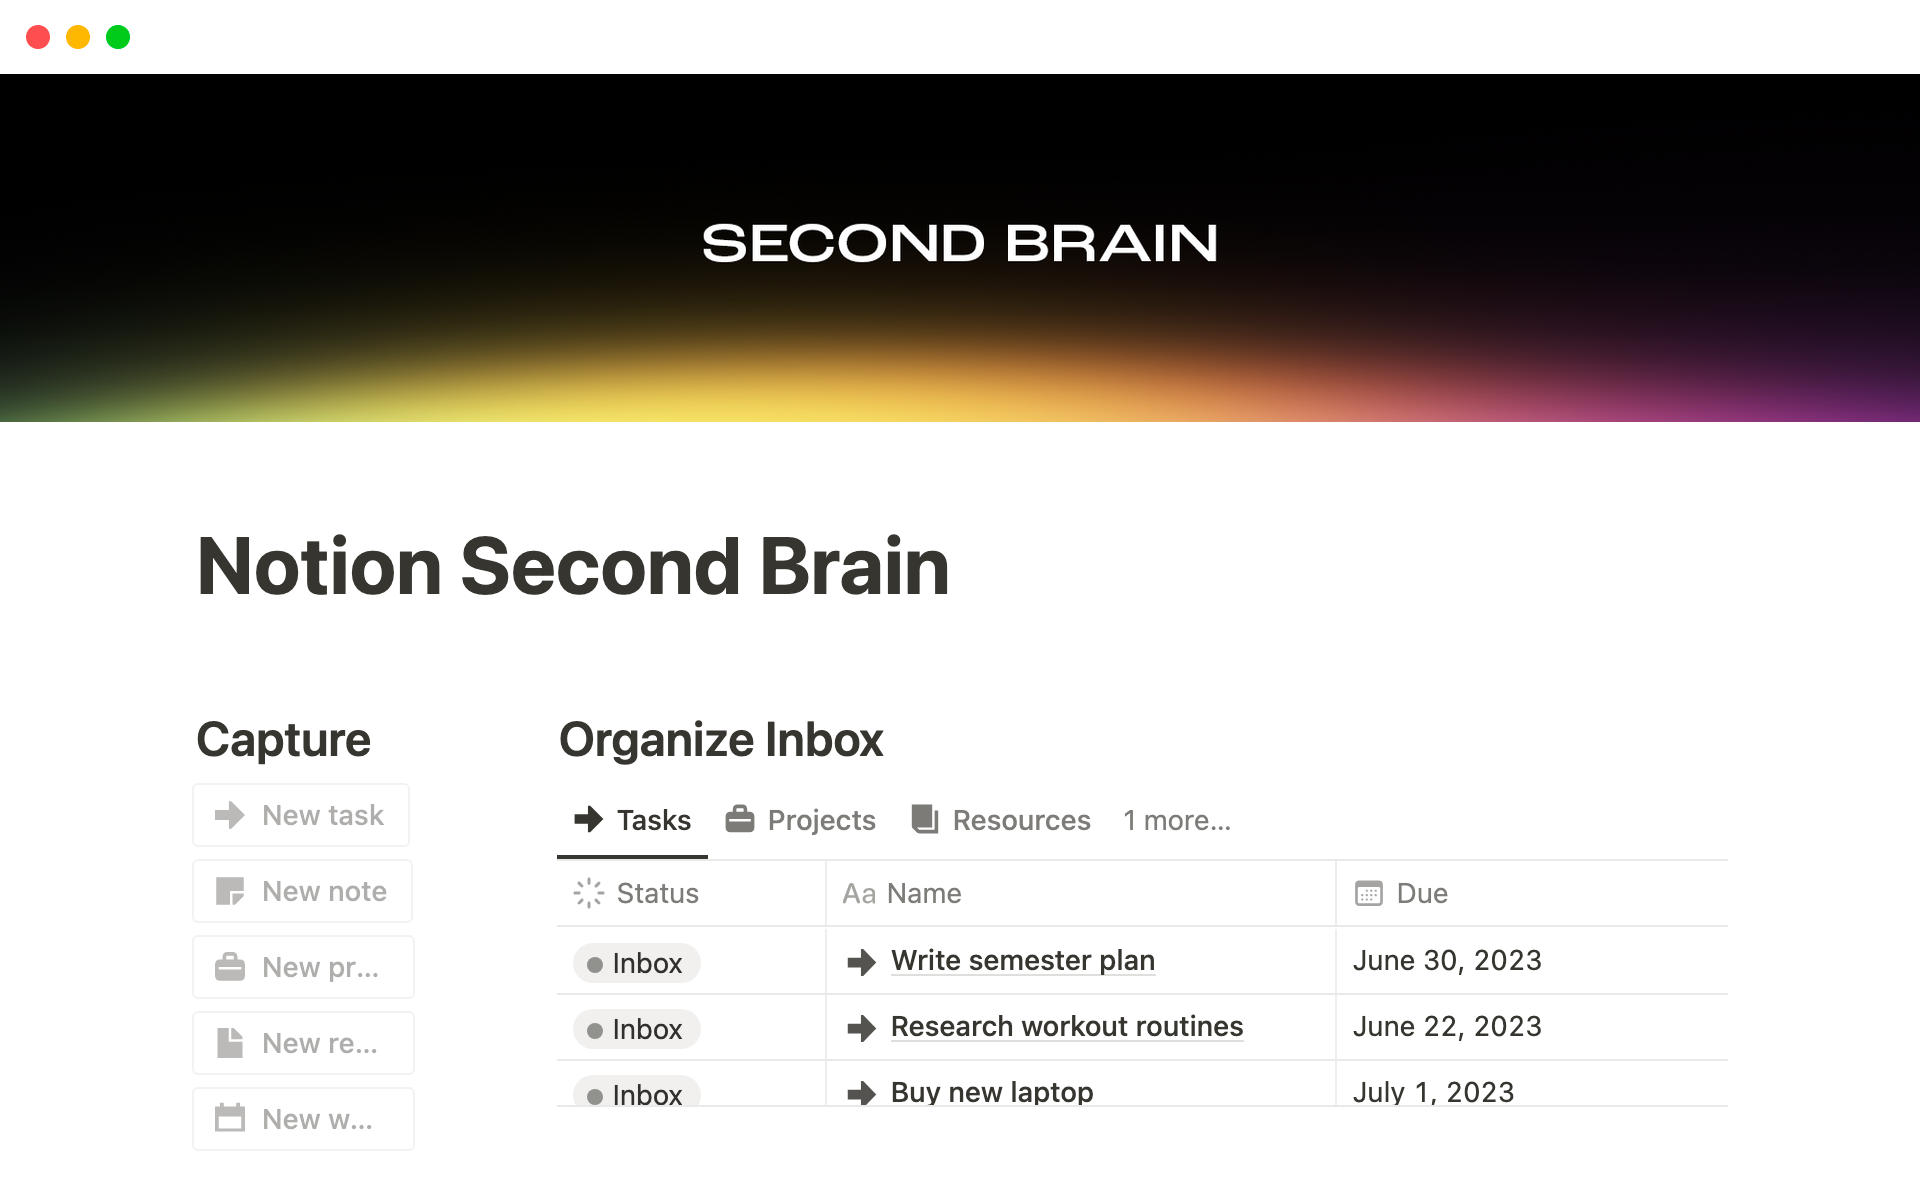 Get productive & organize your life with Notion Second Brain.